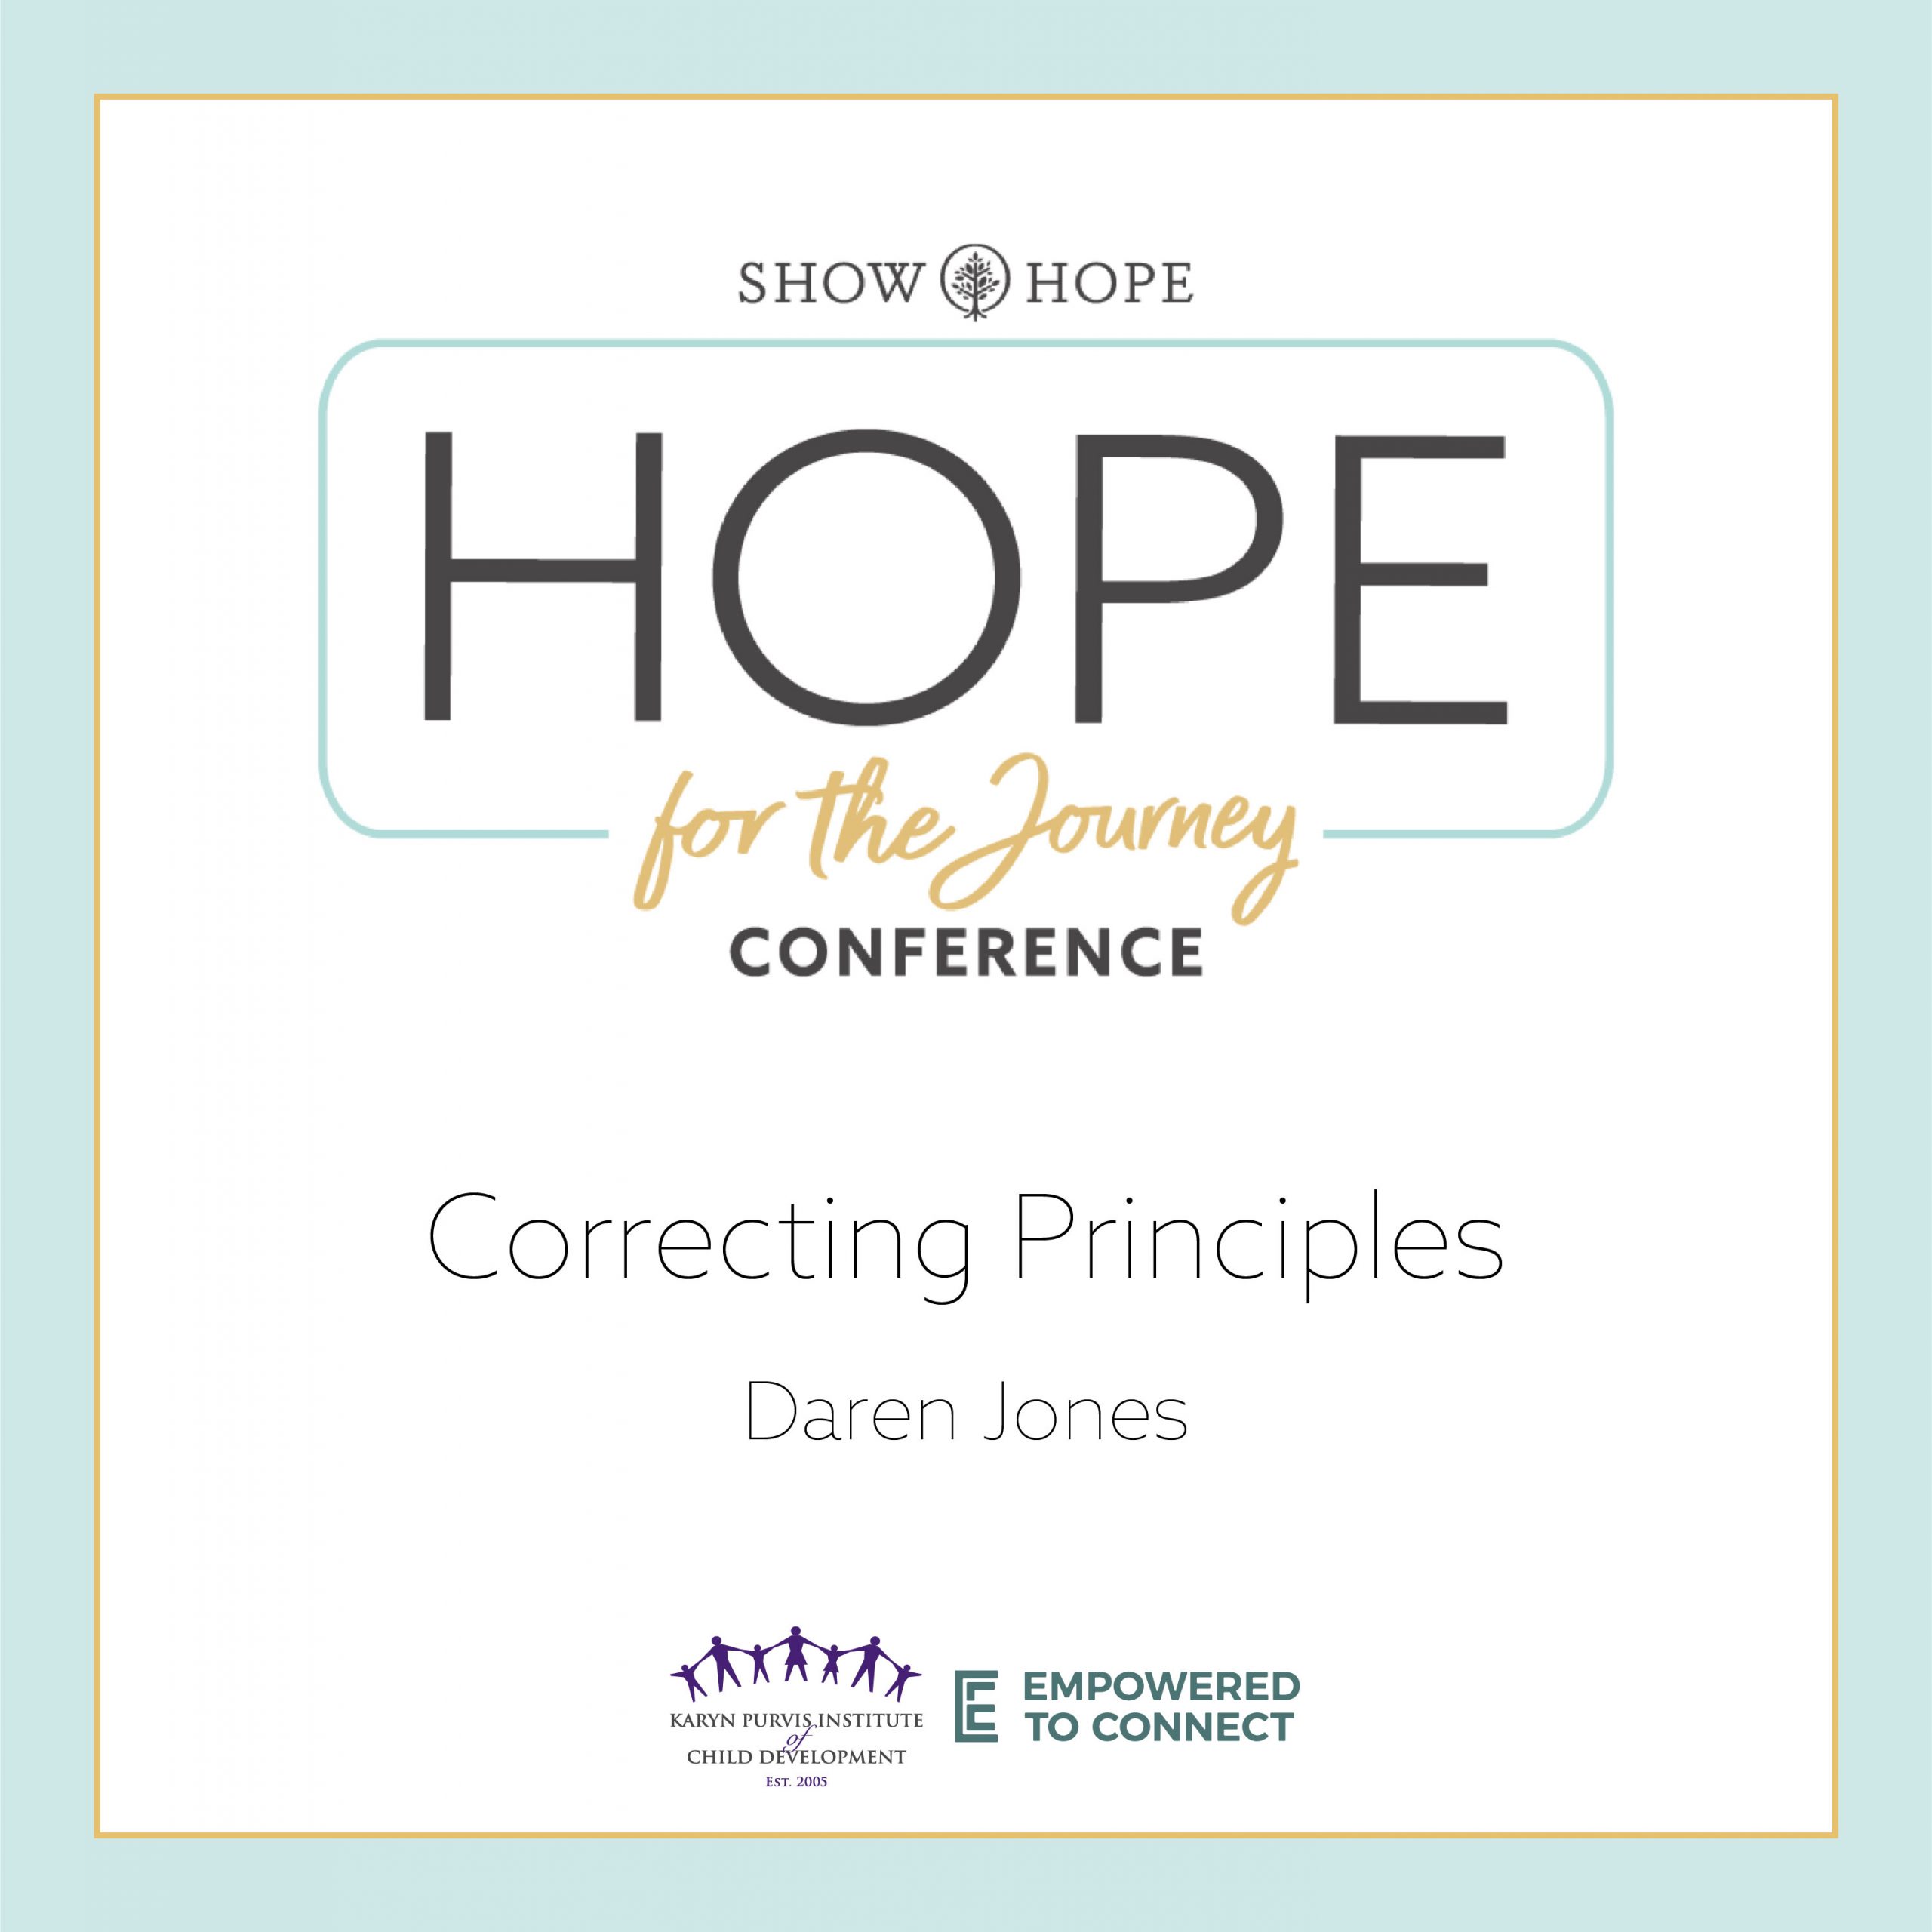 Hope for the Journey Conference 2022 Correcting Principles with Daren Jones